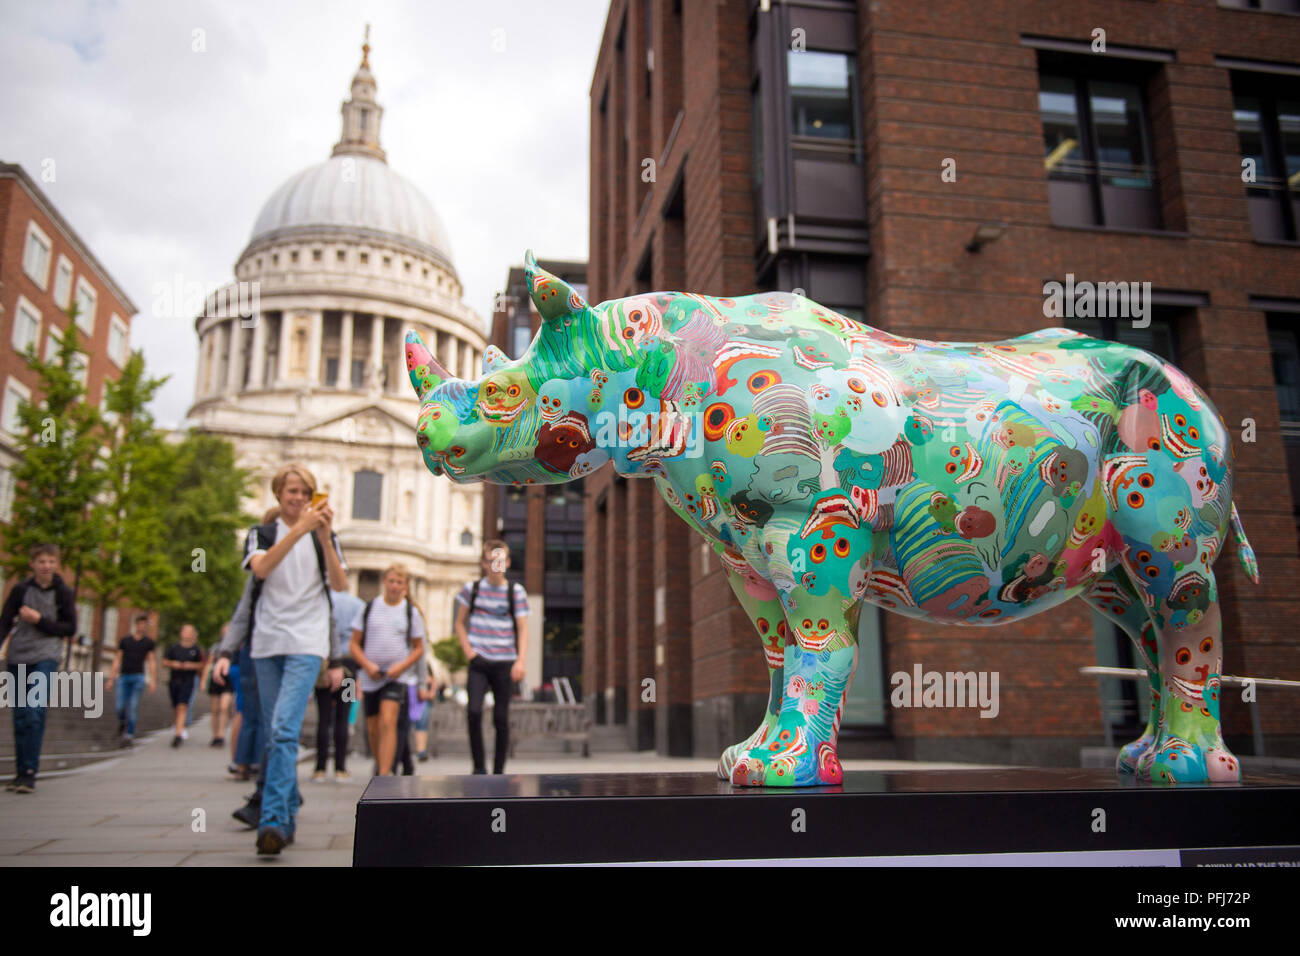 A black rhino sculpture painted by Zhang Huan, near St Paul's Cathedral, London, part of the Tusk Rhino Trail which features 20 sculptures decorated by leading artists on display around the city until World Rhino Day on September 22. Stock Photo